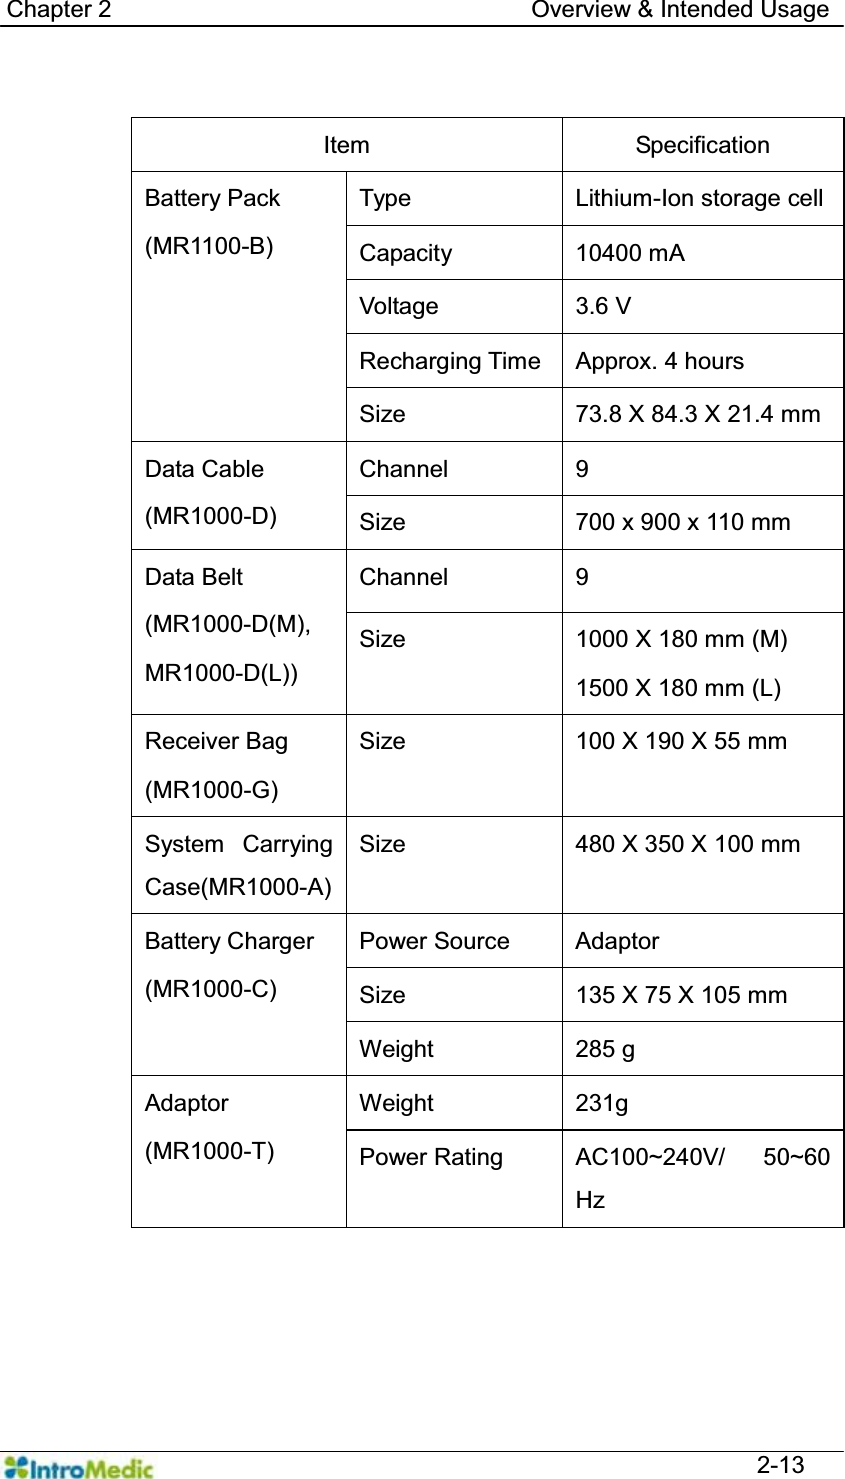   Chapter 2                                   Overview &amp; Intended Usage  2-13  Item Specification Battery Pack (MR1100-B) Type  Lithium-Ion storage cell Capacity 10400 mA Voltage 3.6 V Recharging Time  Approx. 4 hours Size  73.8 X 84.3 X 21.4 mm Data Cable (MR1000-D) Channel 9 Size  700 x 900 x 110 mm Data Belt (MR1000-D(M), MR1000-D(L)) Channel 9 Size  1000 X 180 mm (M) 1500 X 180 mm (L) Receiver Bag (MR1000-G) Size  100 X 190 X 55 mm System Carrying Case(MR1000-A) Size  480 X 350 X 100 mm Battery Charger (MR1000-C) Power Source  Adaptor Size  135 X 75 X 105 mm Weight 285 g Adaptor (MR1000-T) Weight 231g Power Rating  AC100~240V/  50~60 Hz    